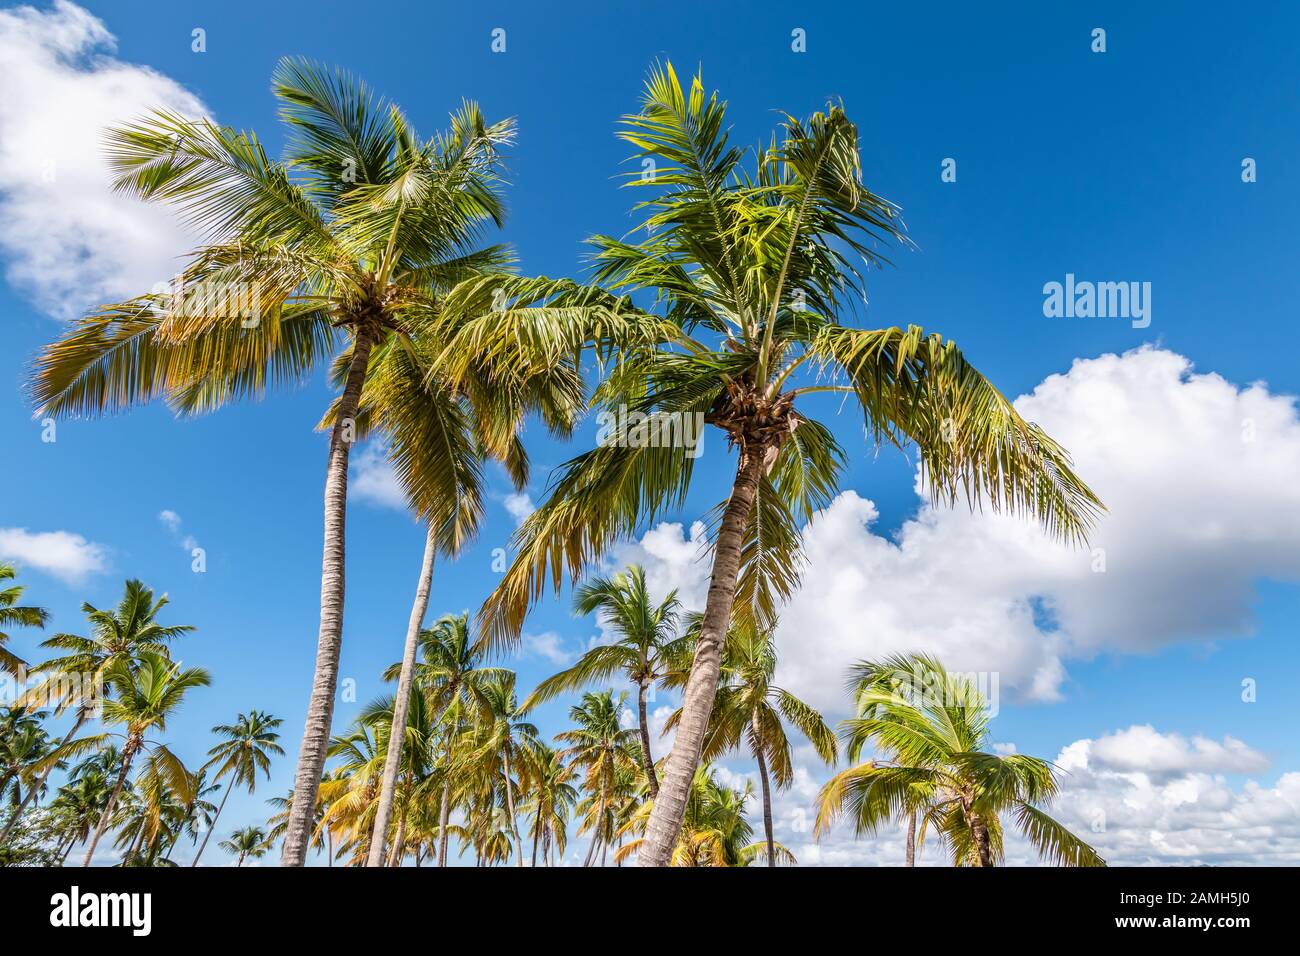 Palm trees on a beach of the Dominican Republic, Caribbean. Stock Photo